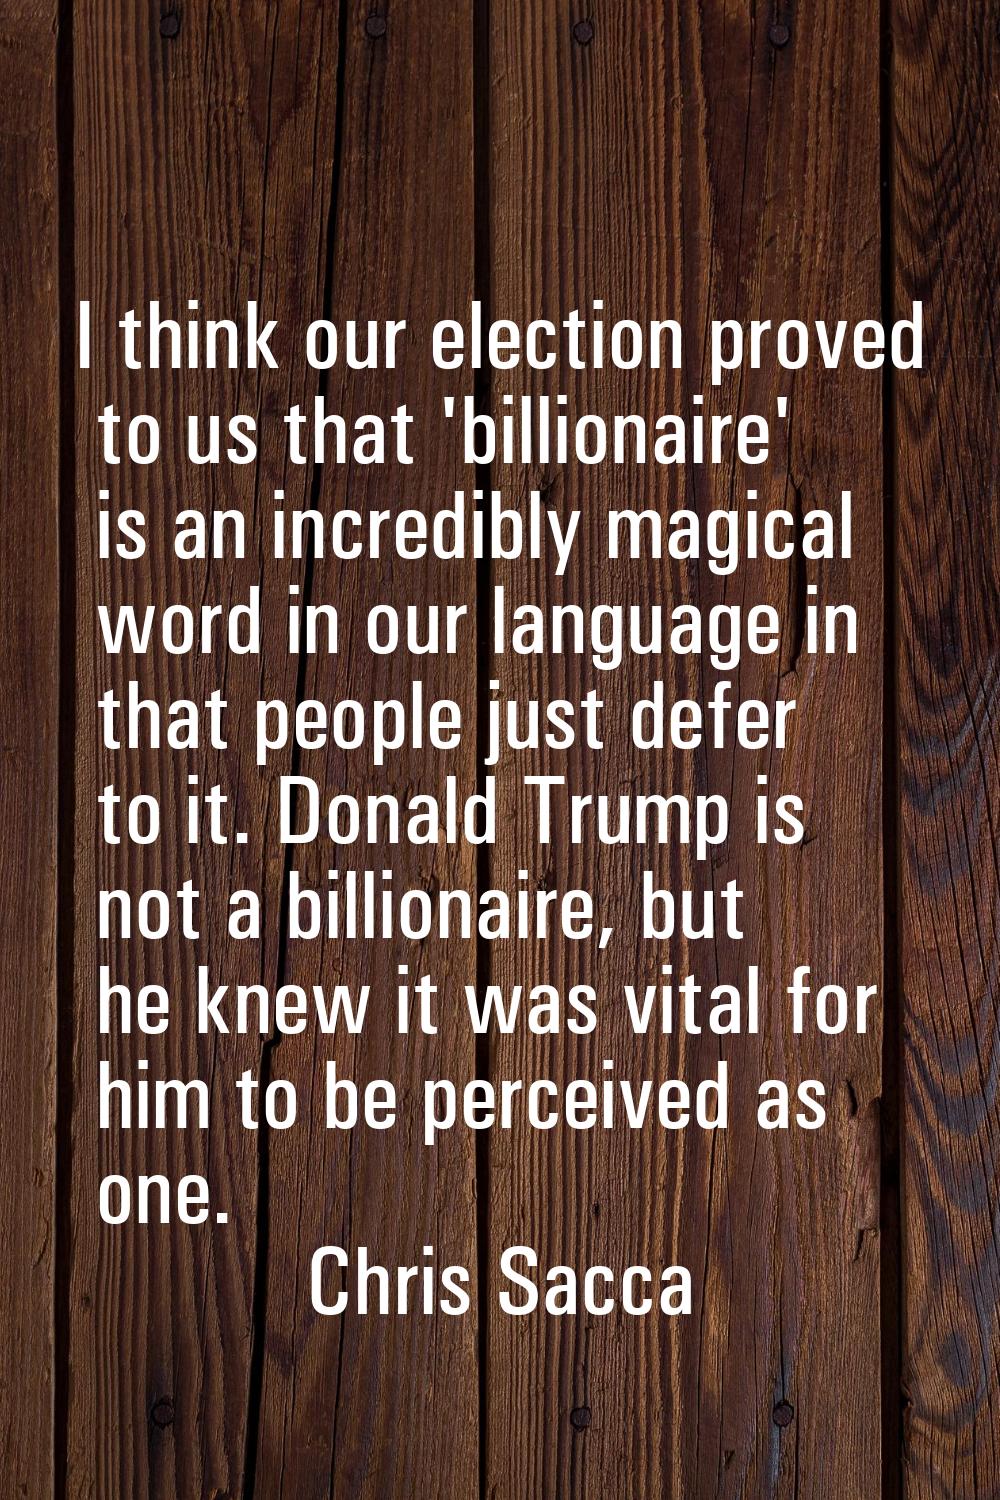 I think our election proved to us that 'billionaire' is an incredibly magical word in our language 